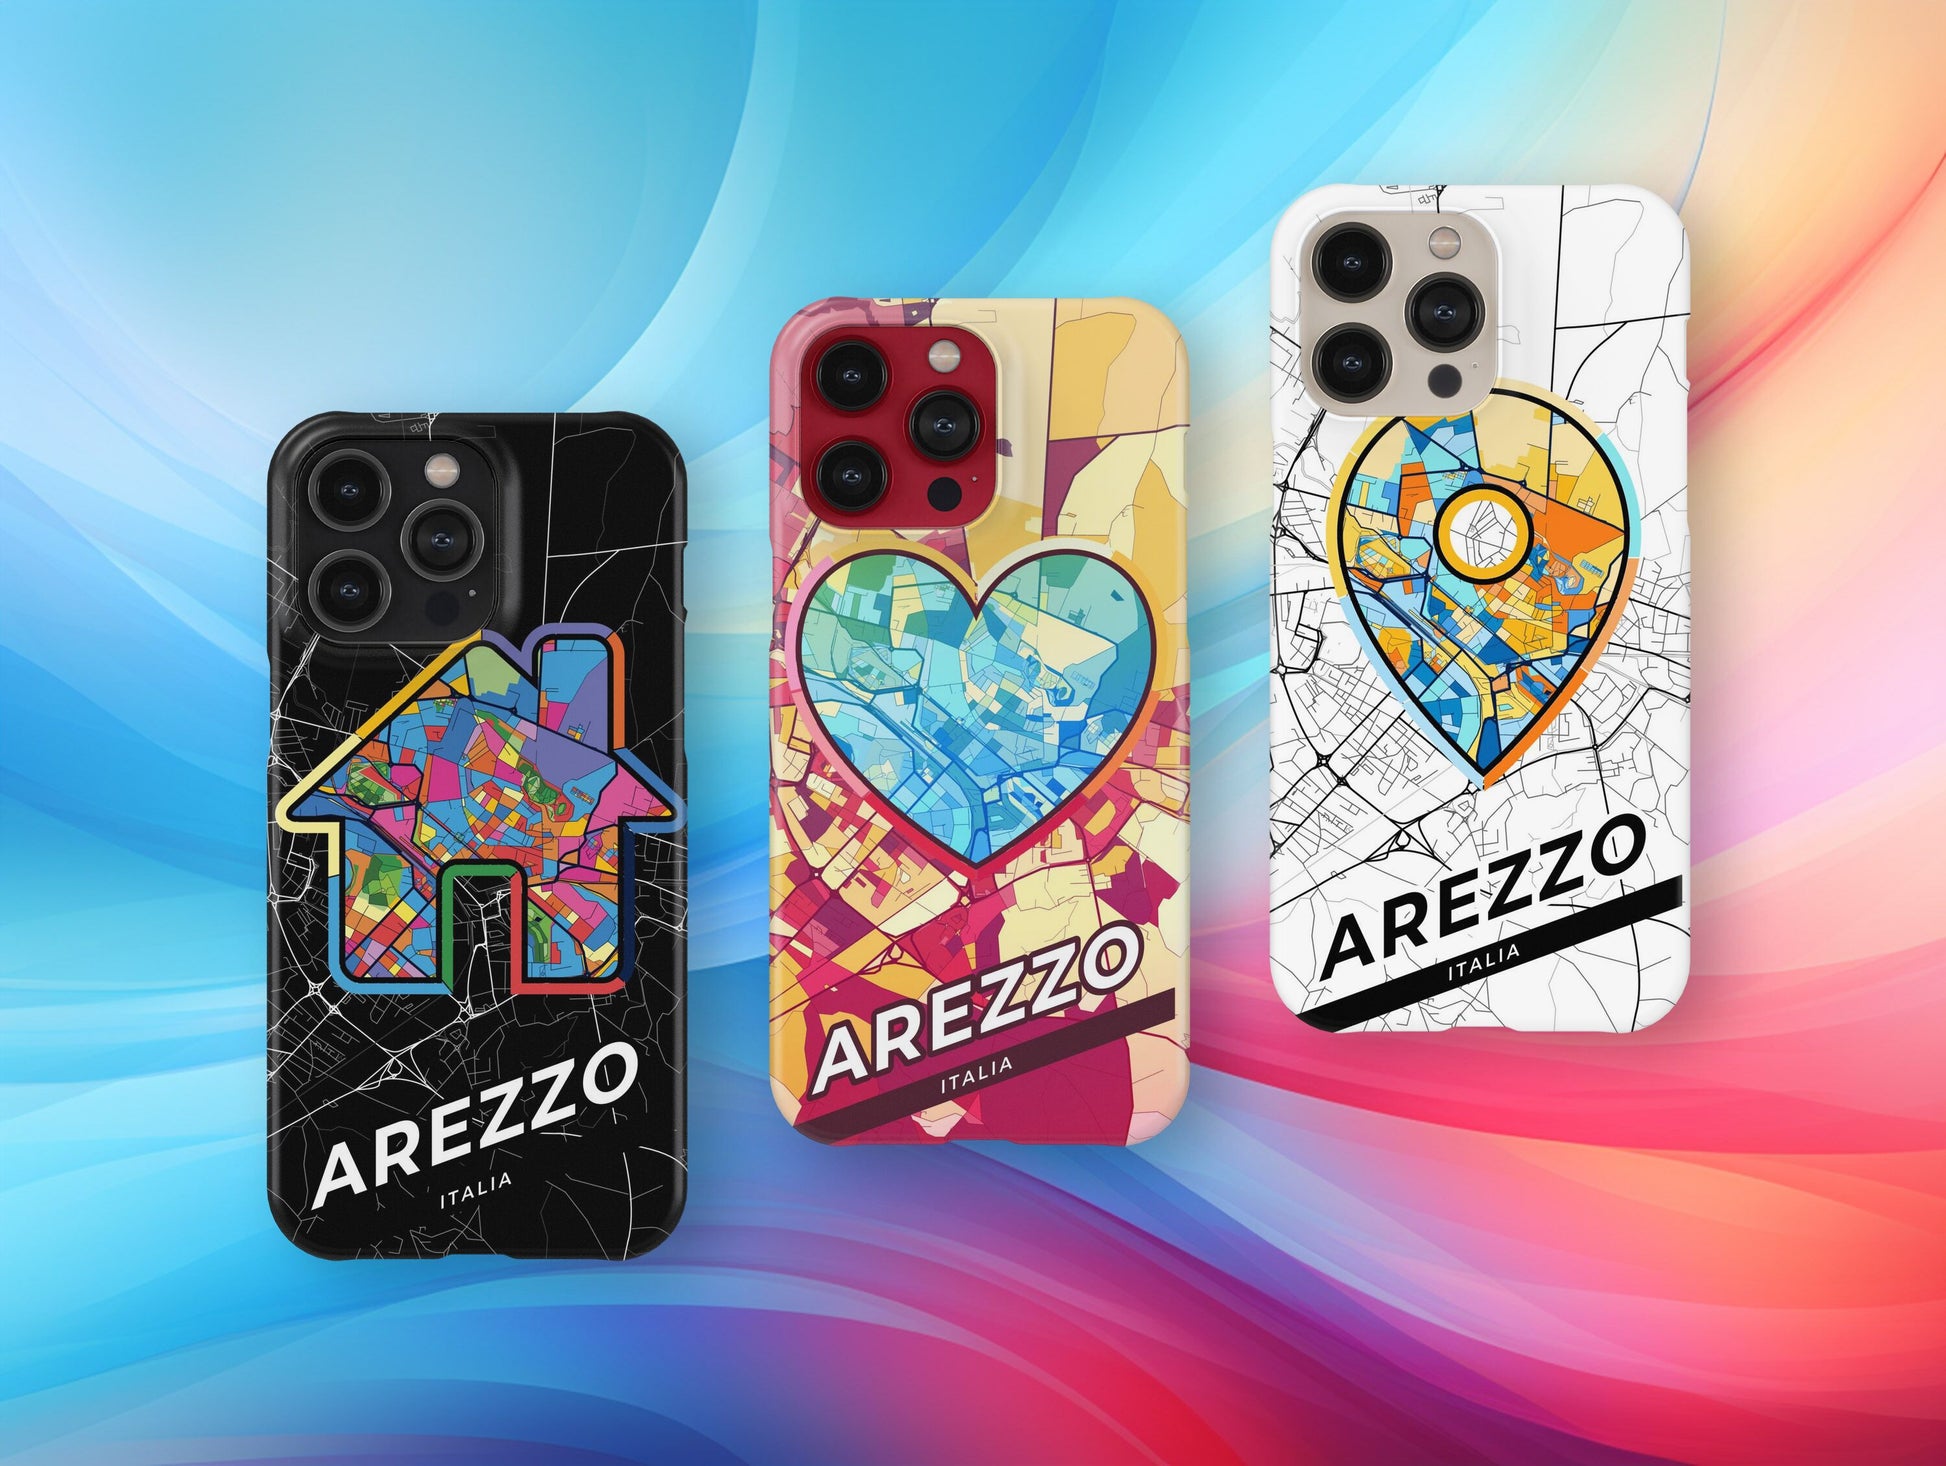 Arezzo Italy slim phone case with colorful icon. Birthday, wedding or housewarming gift. Couple match cases.